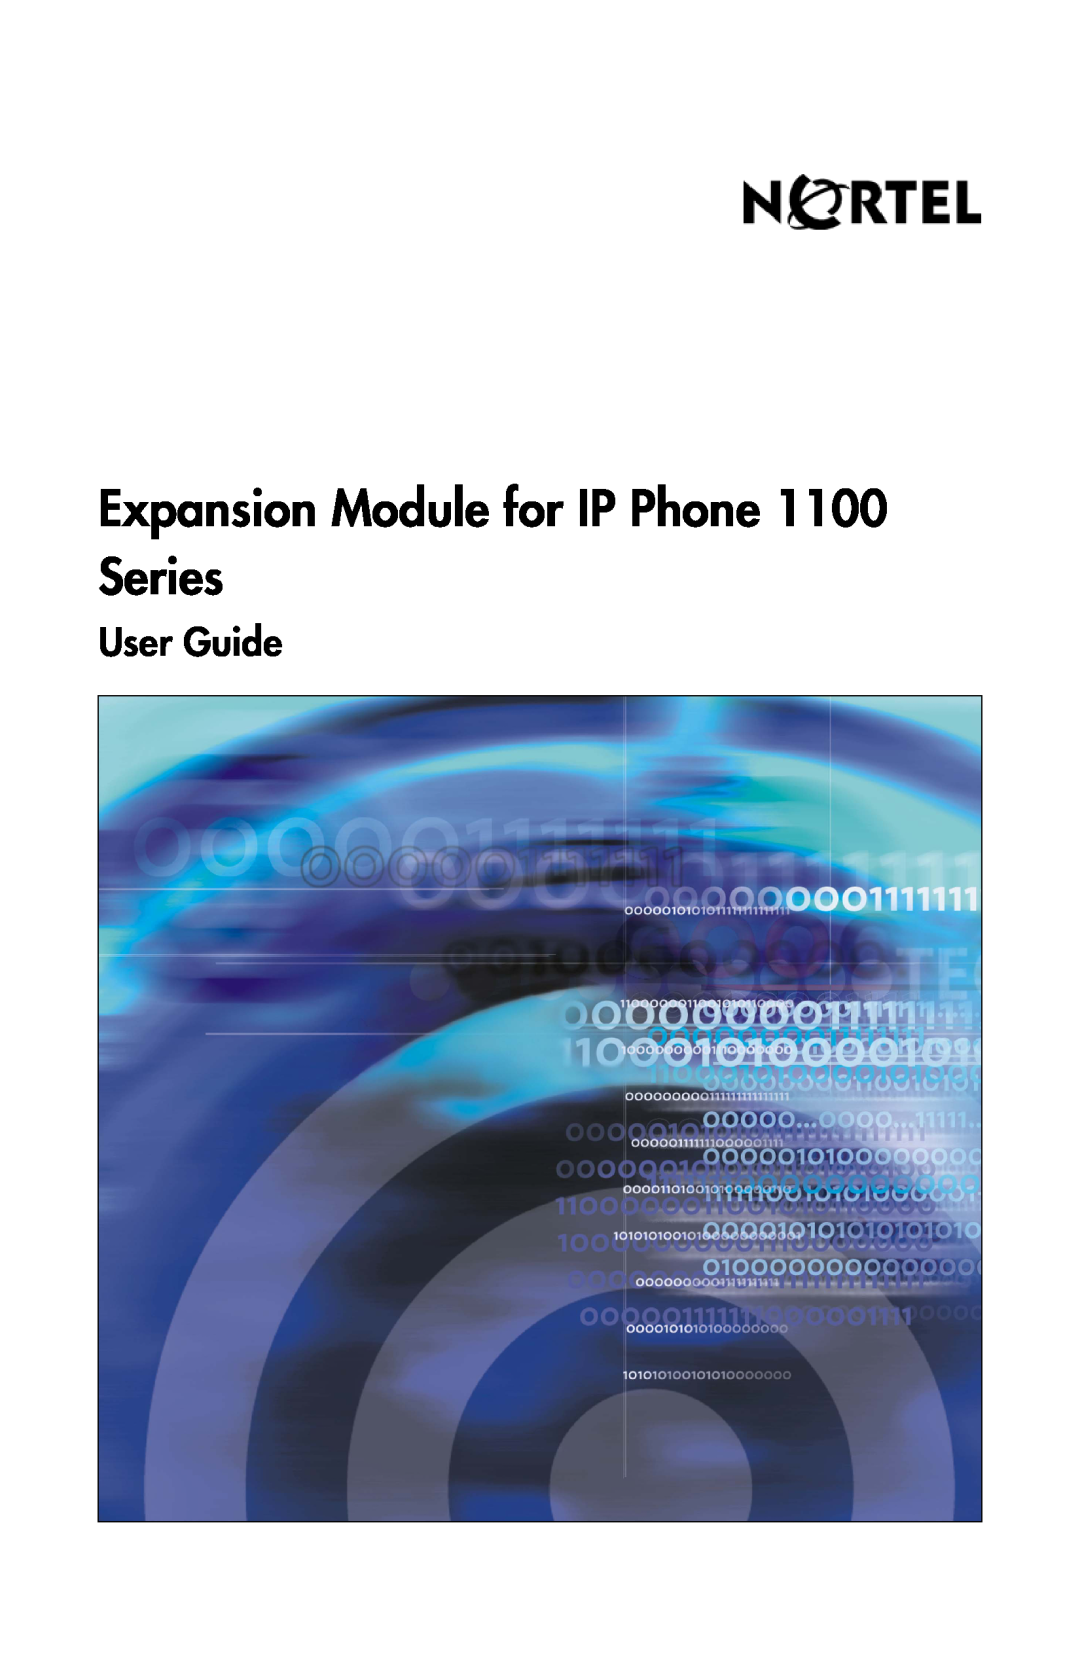 Nortel Networks manual Expansion Module for IP Phone 1100 Series, User Guide 